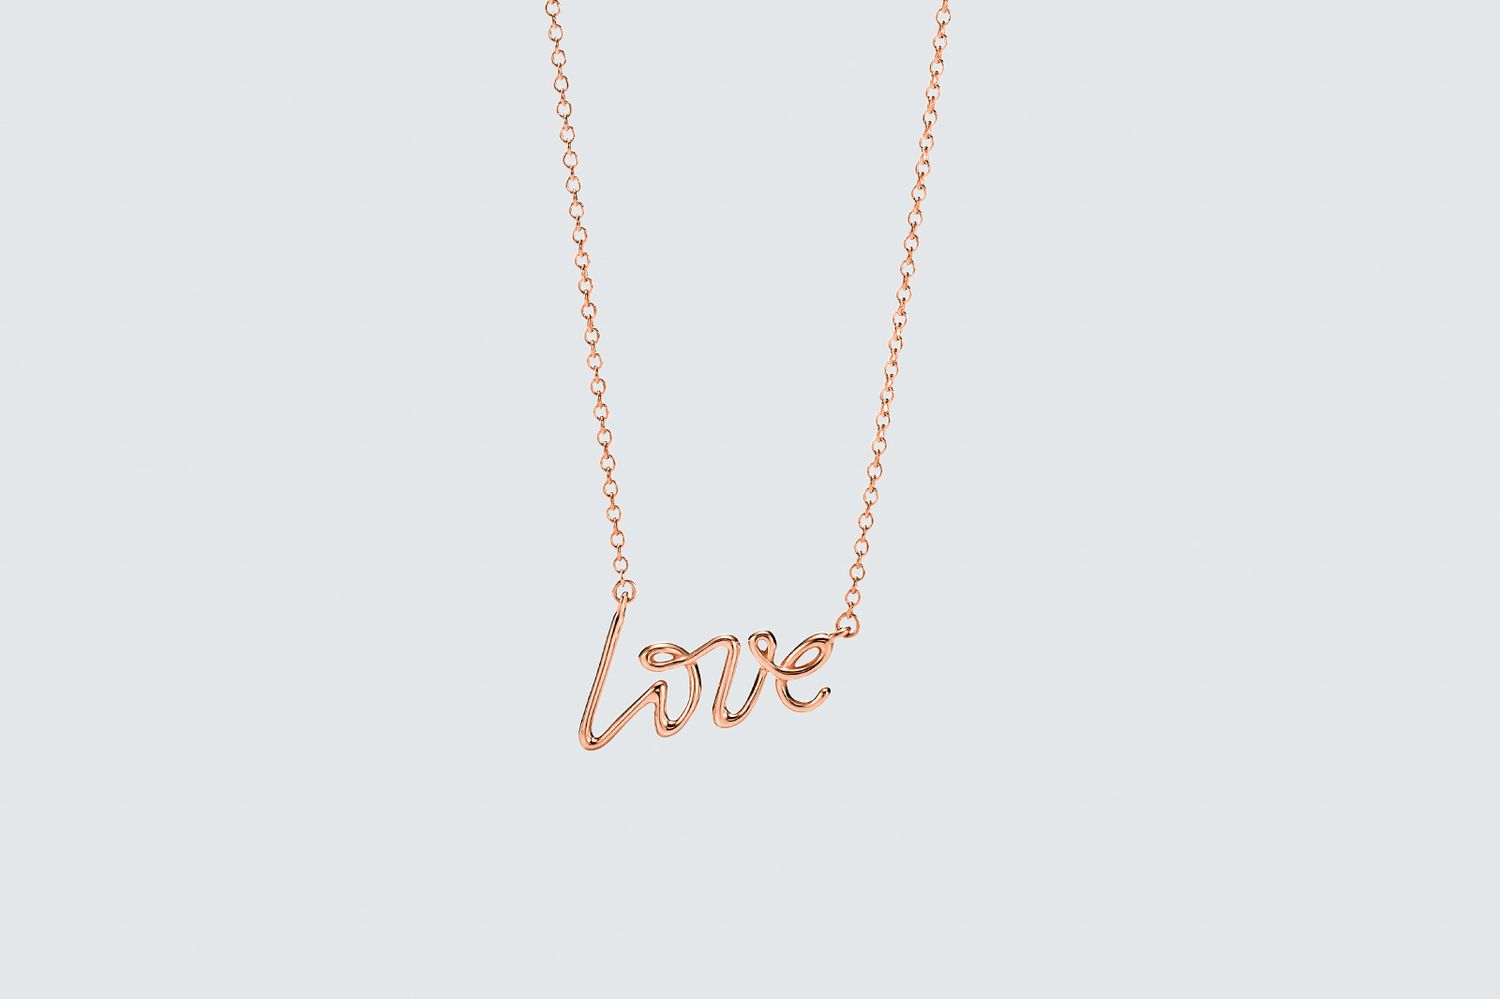 Rose gold necklace on solid background